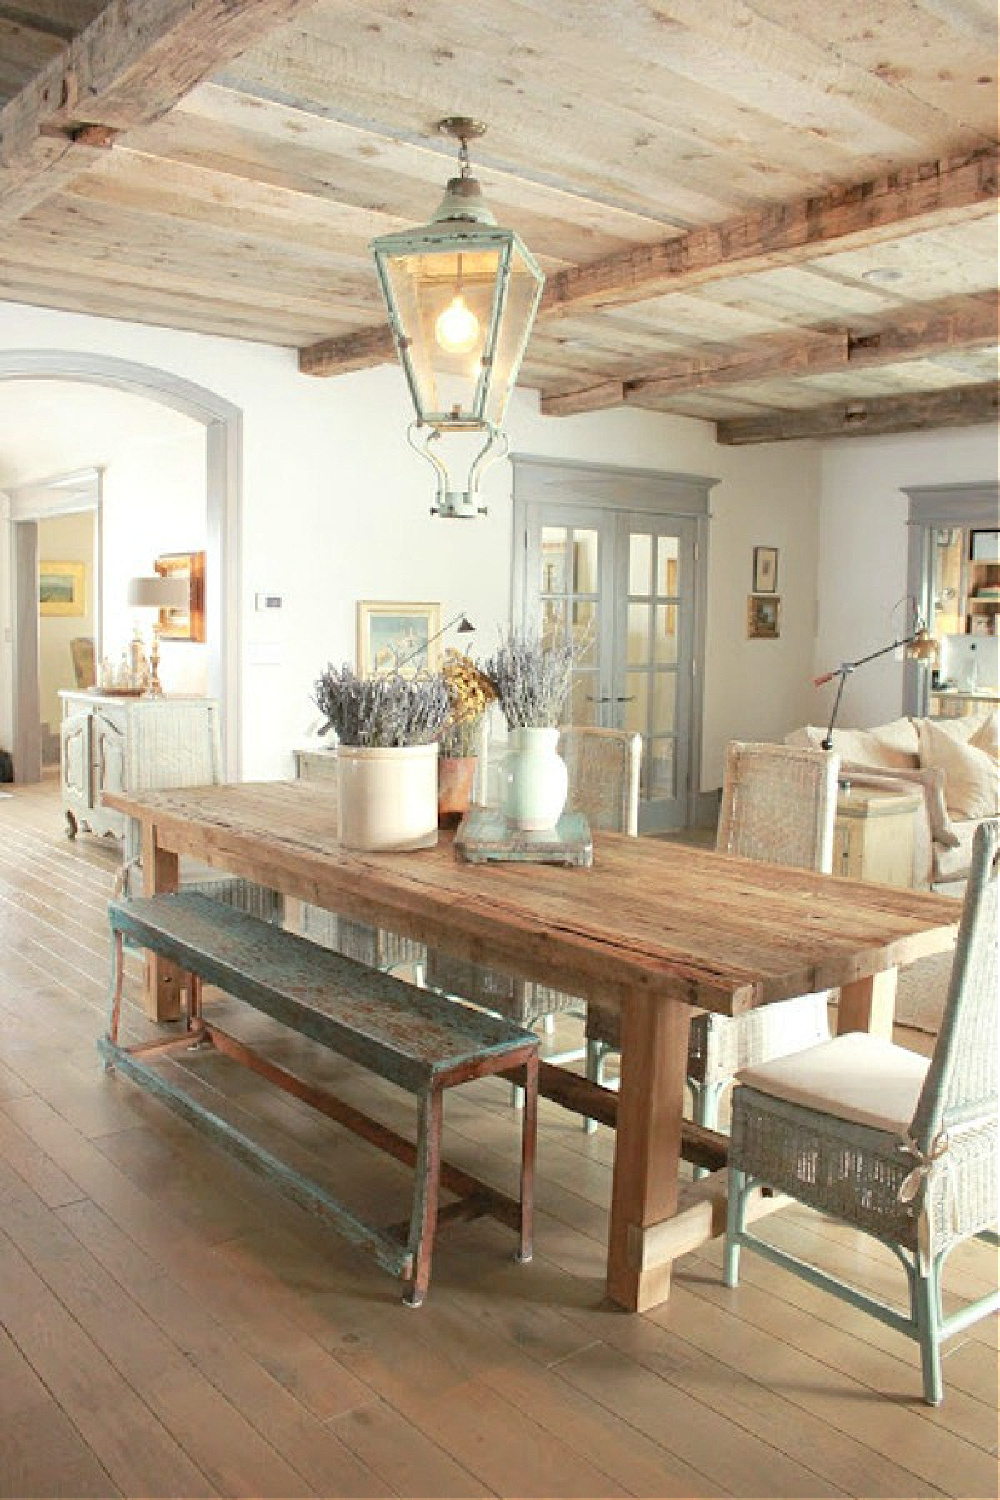 Breakfast dining area in rustically elegant European country cottage - Desiree of Beljar Home and DecordeProvence. #europeancountry #cottagestyleinteriors